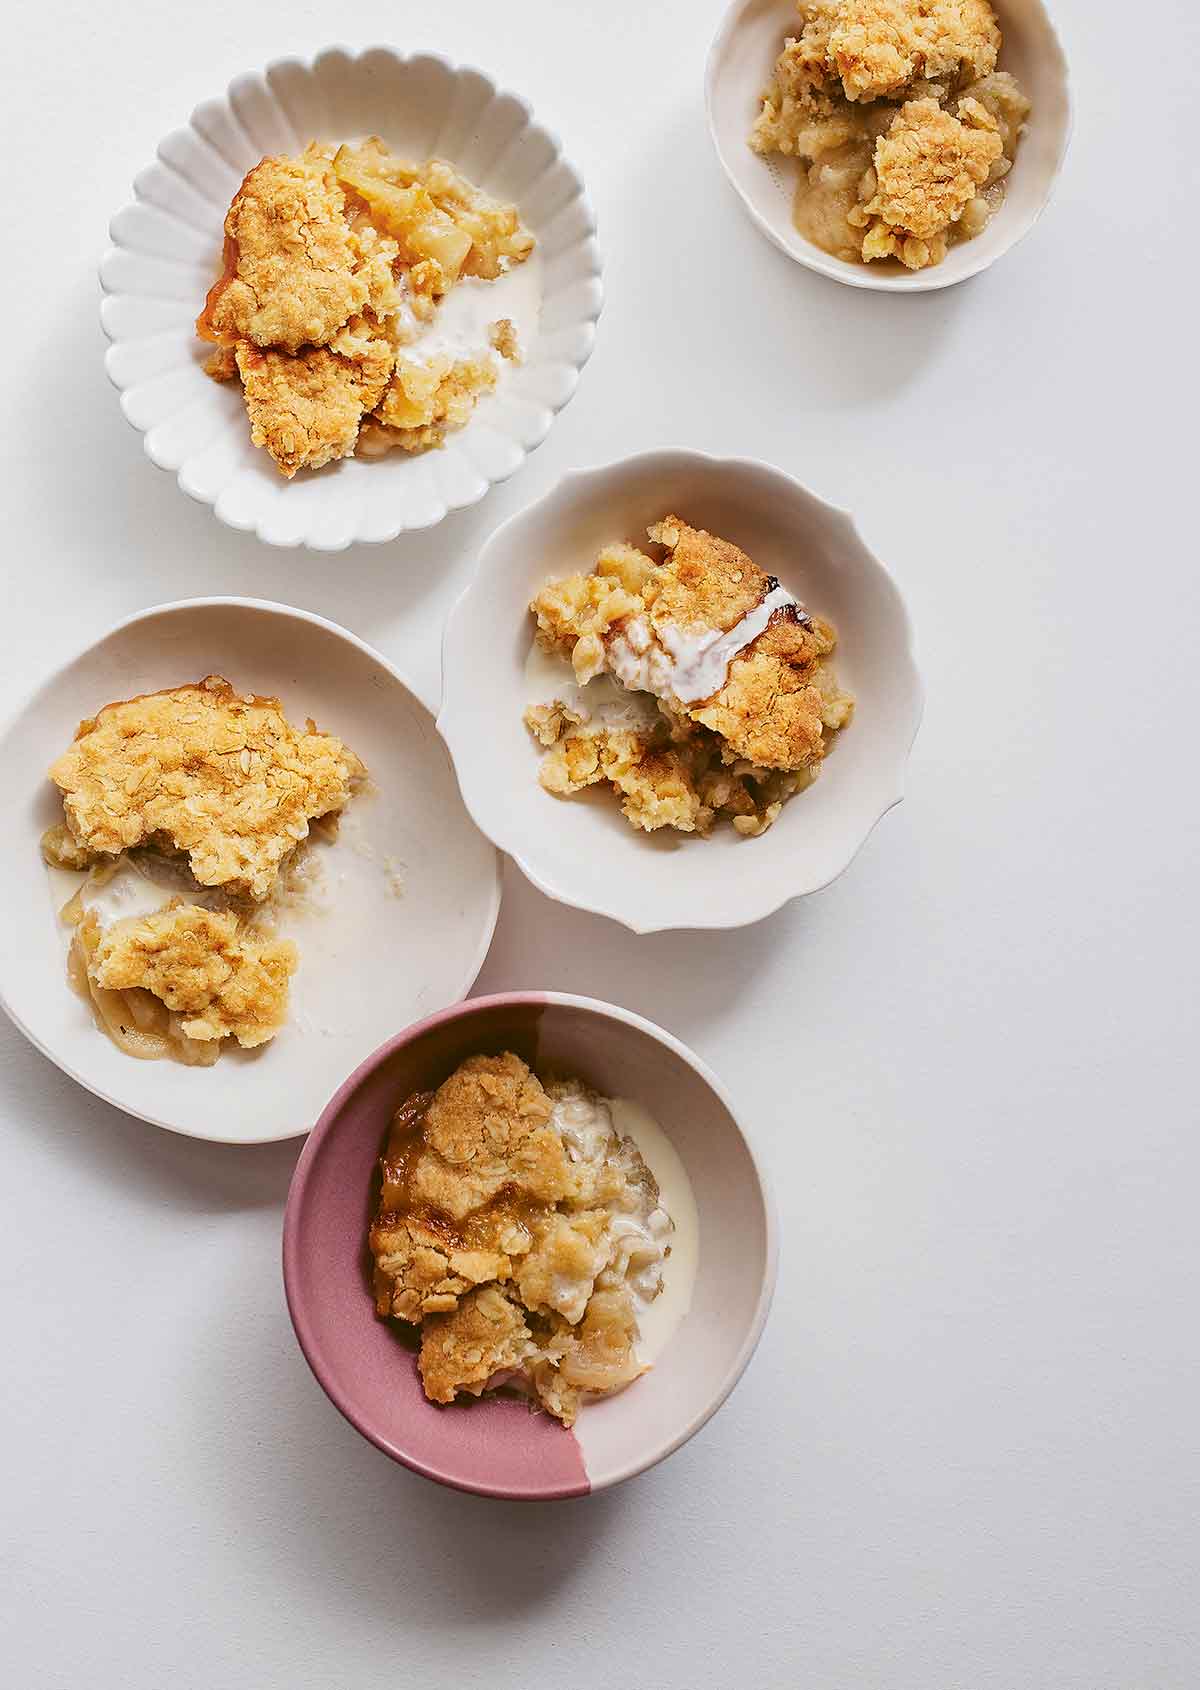 Five individual servings of apple crumble in different bowls.